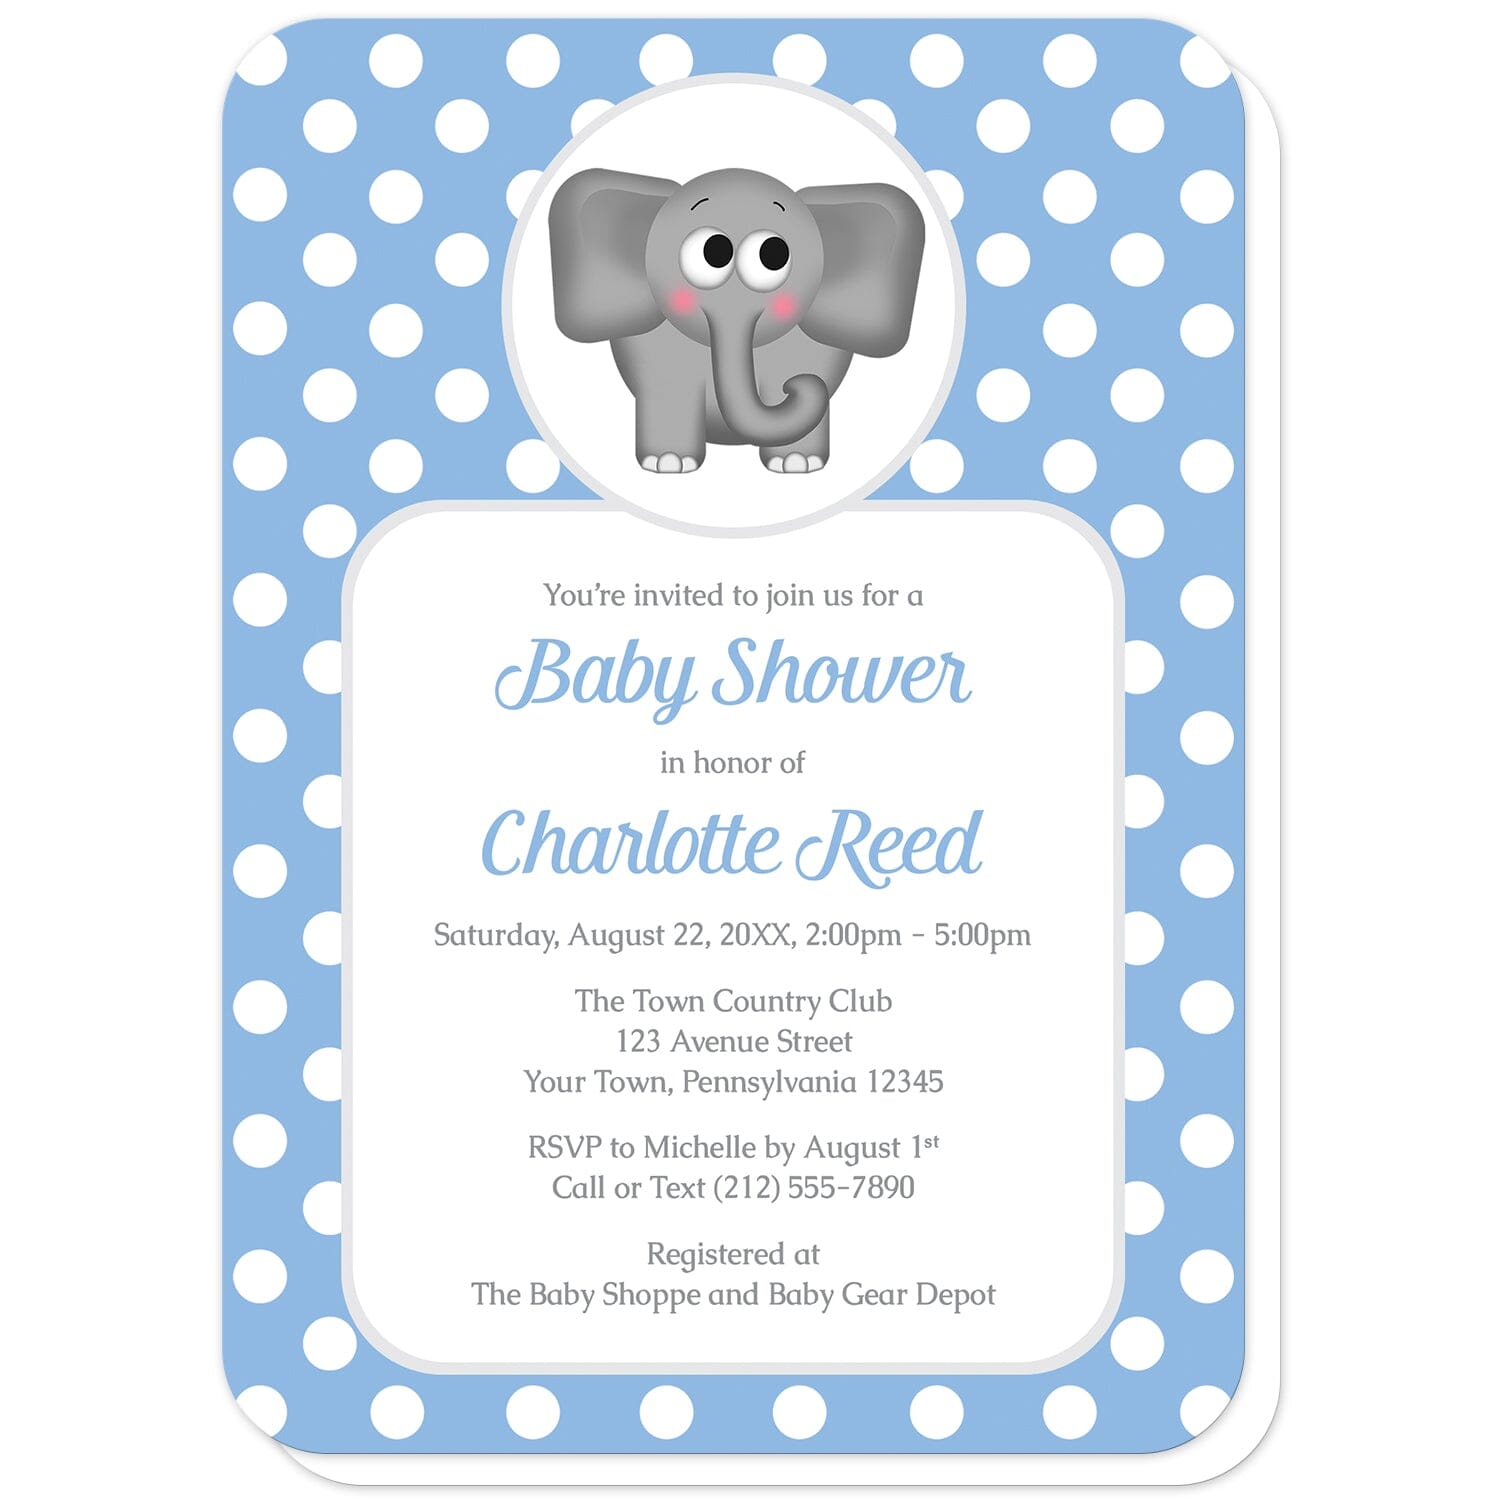 Cute Elephant Blue Polka Dot Baby Shower Invitations (with rounded corners) at Artistically Invited. Cute elephant blue polka dot baby shower invitations that are illustrated with an affectionate and adorable gray elephant over a blue polka dot background. Your personalized baby shower details are custom printed in blue and gray over a white rectangular area over the blue polka dot background.